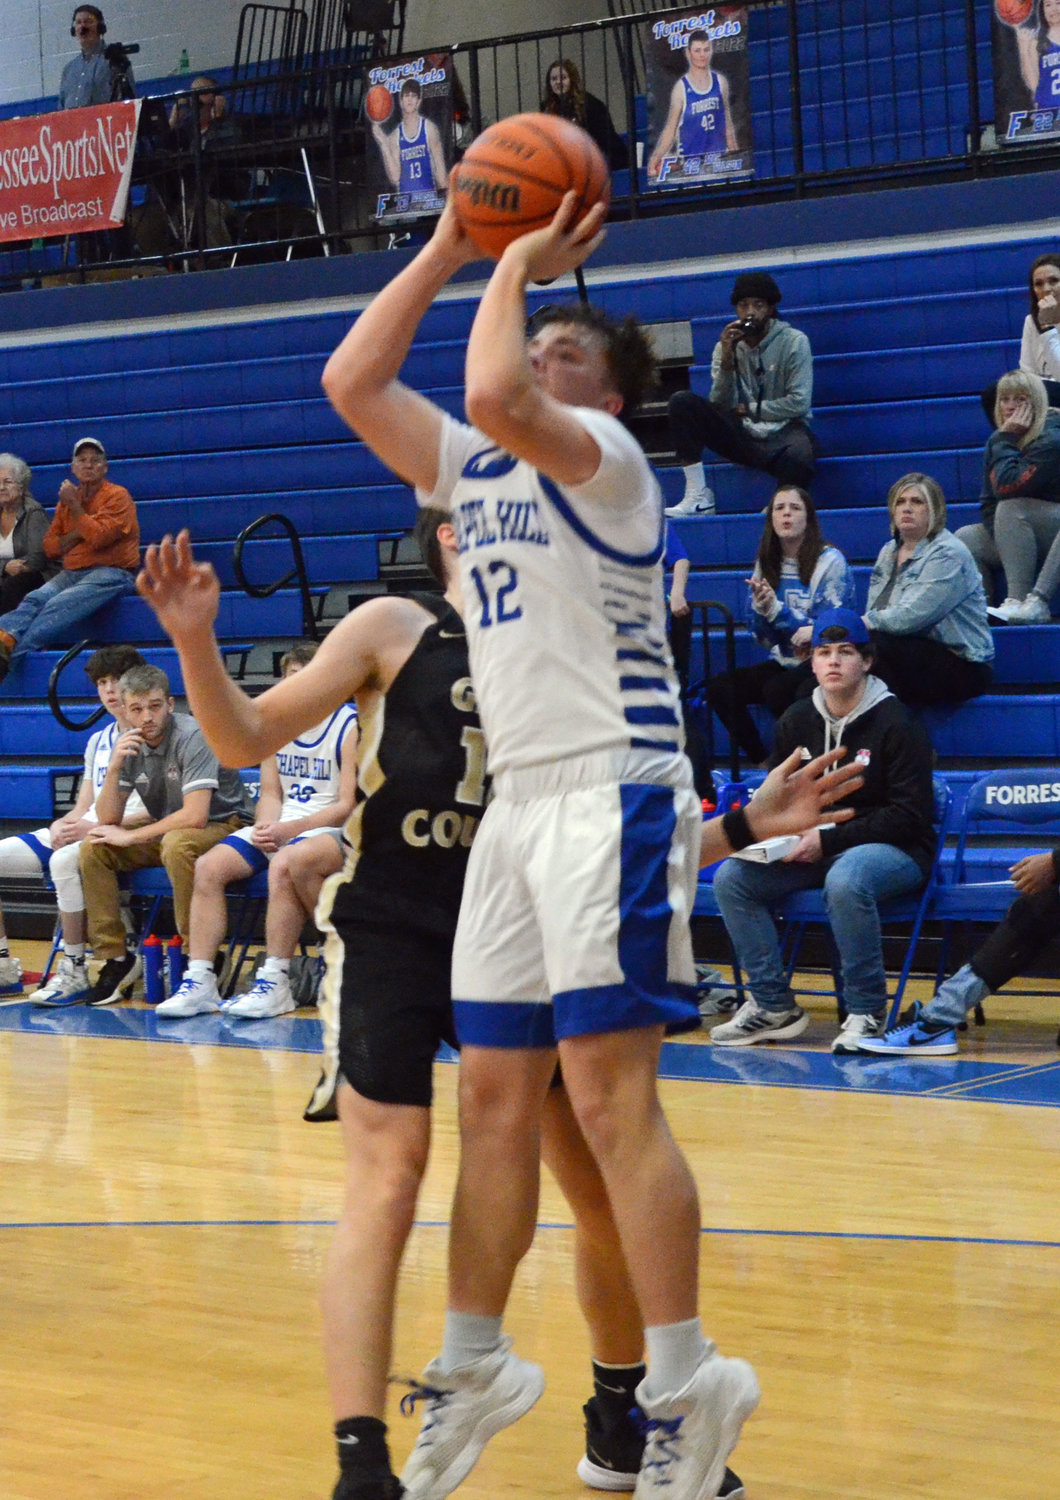 Brennan Mealer (12) pulls up for a jumper on the baseline for two of his 10 points in the game.